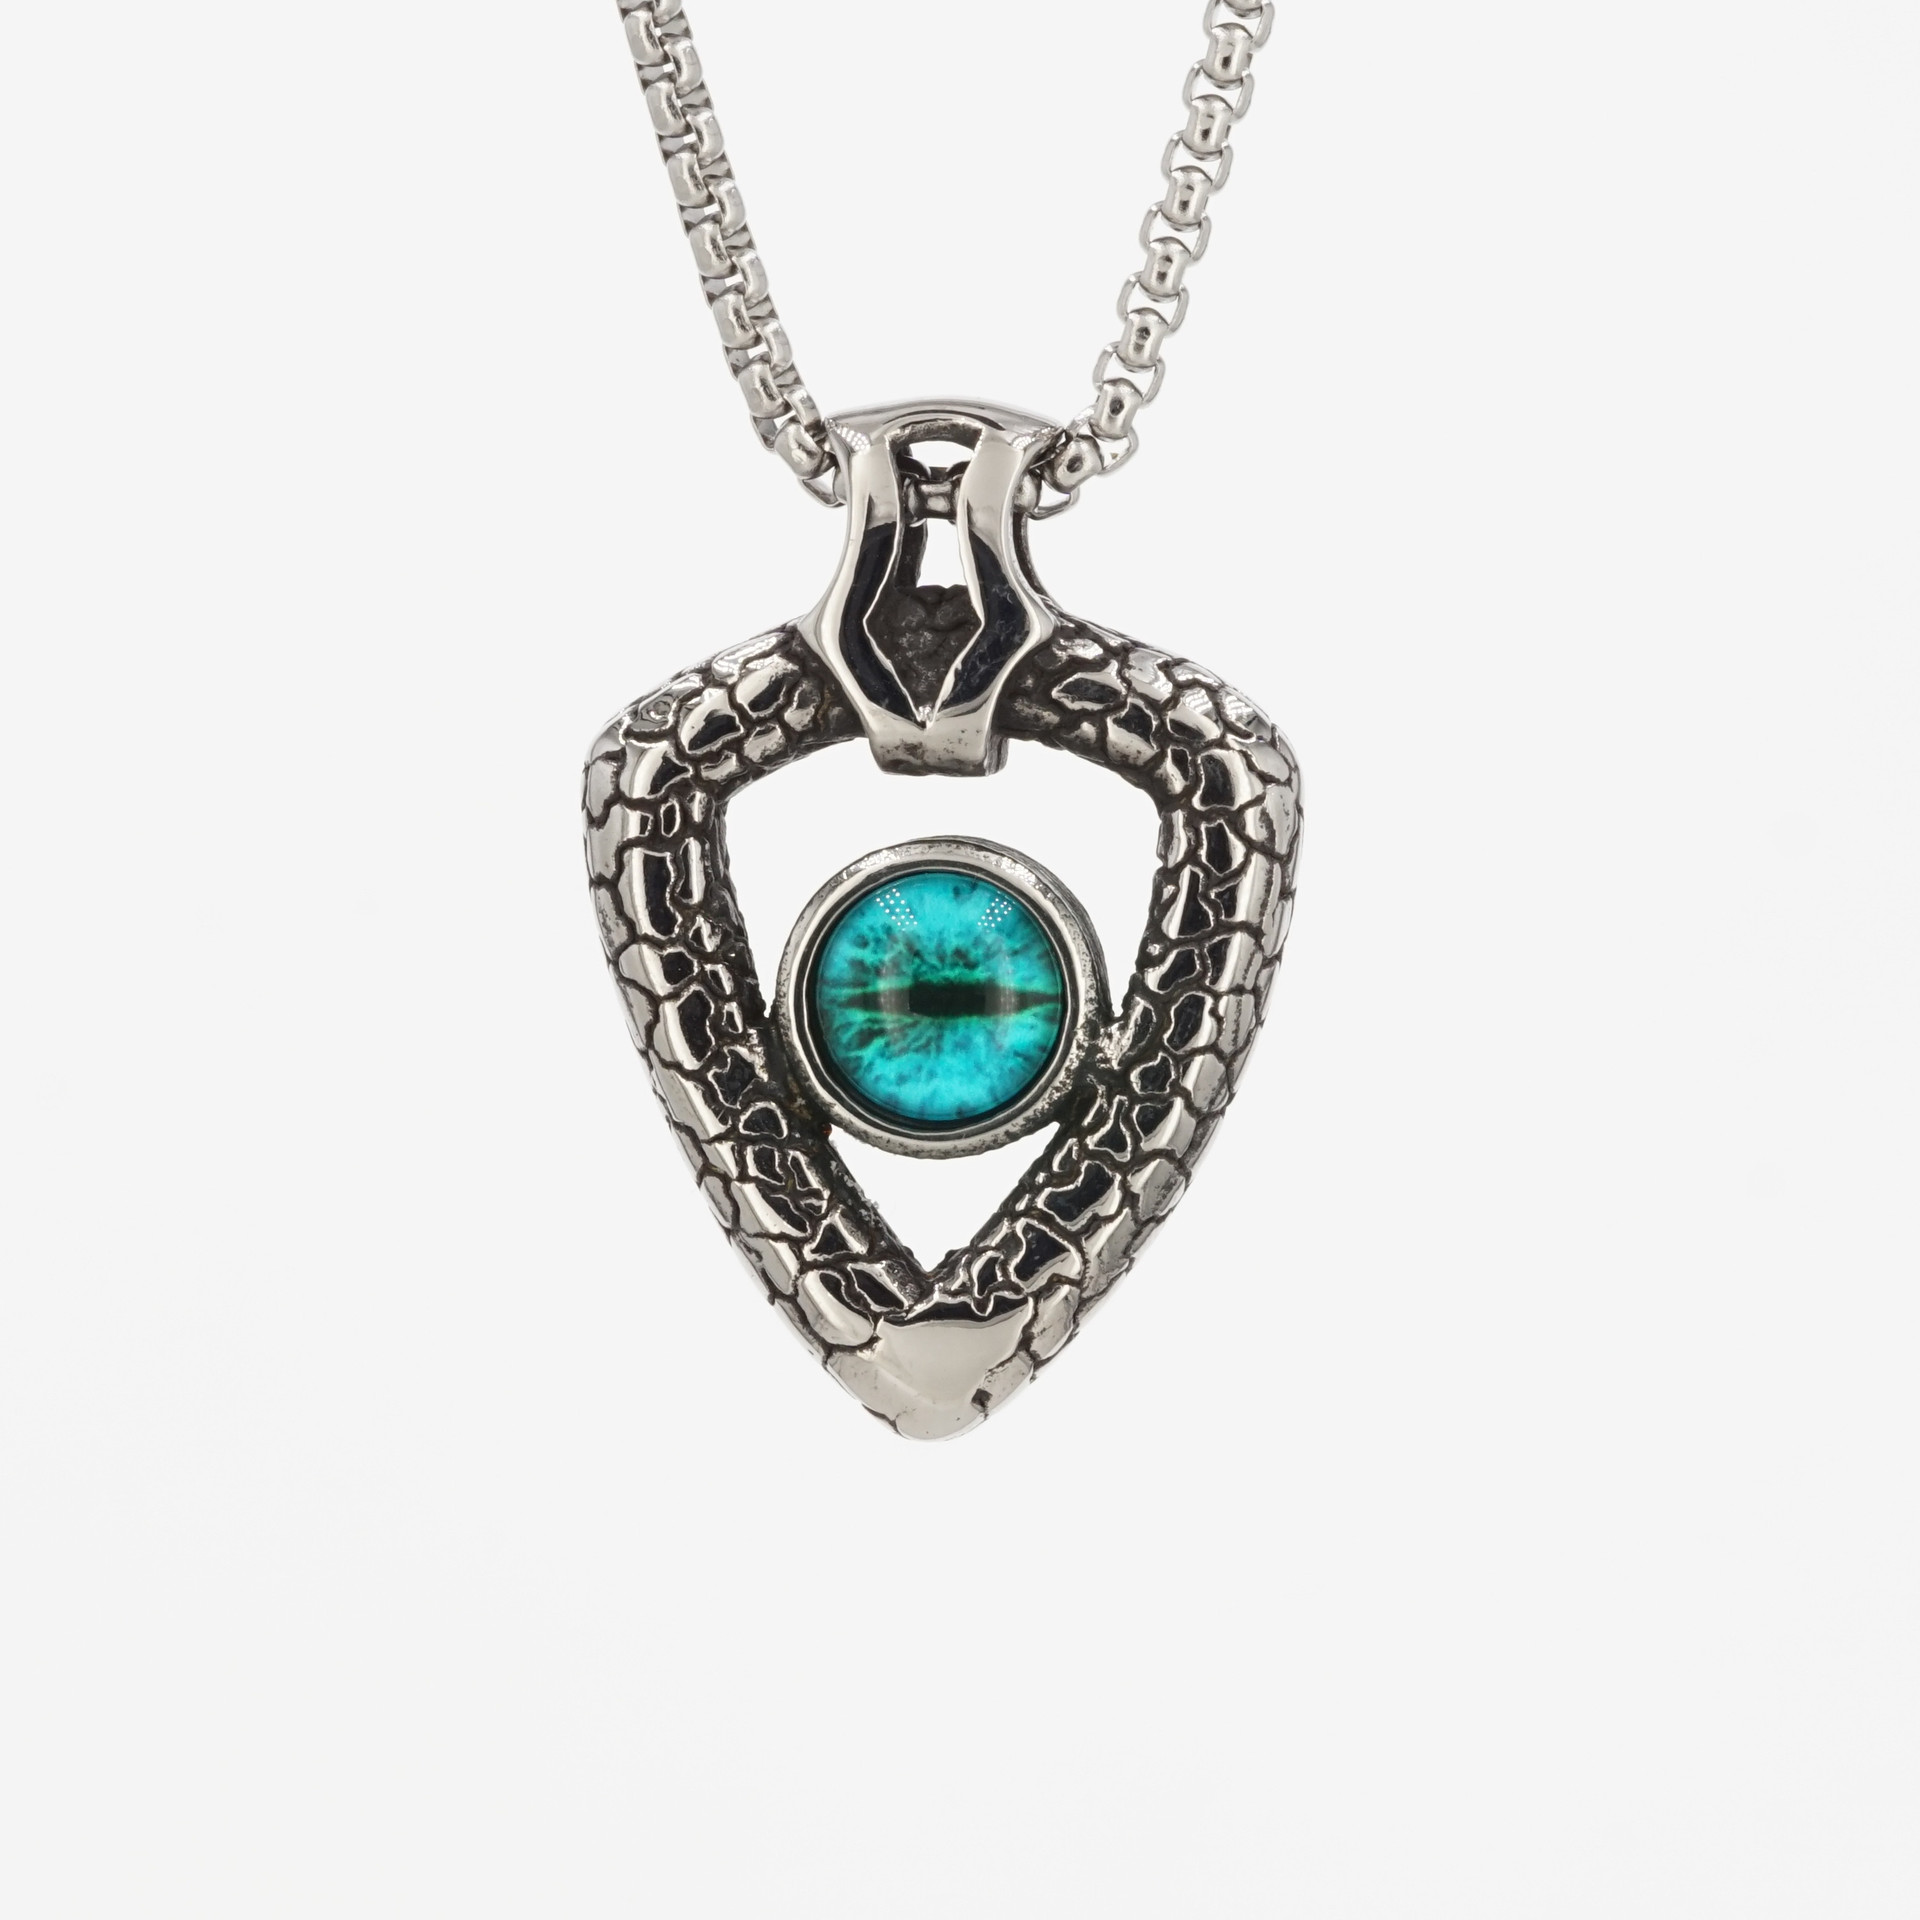 1:Blue Eye single pendant without square pearl chain